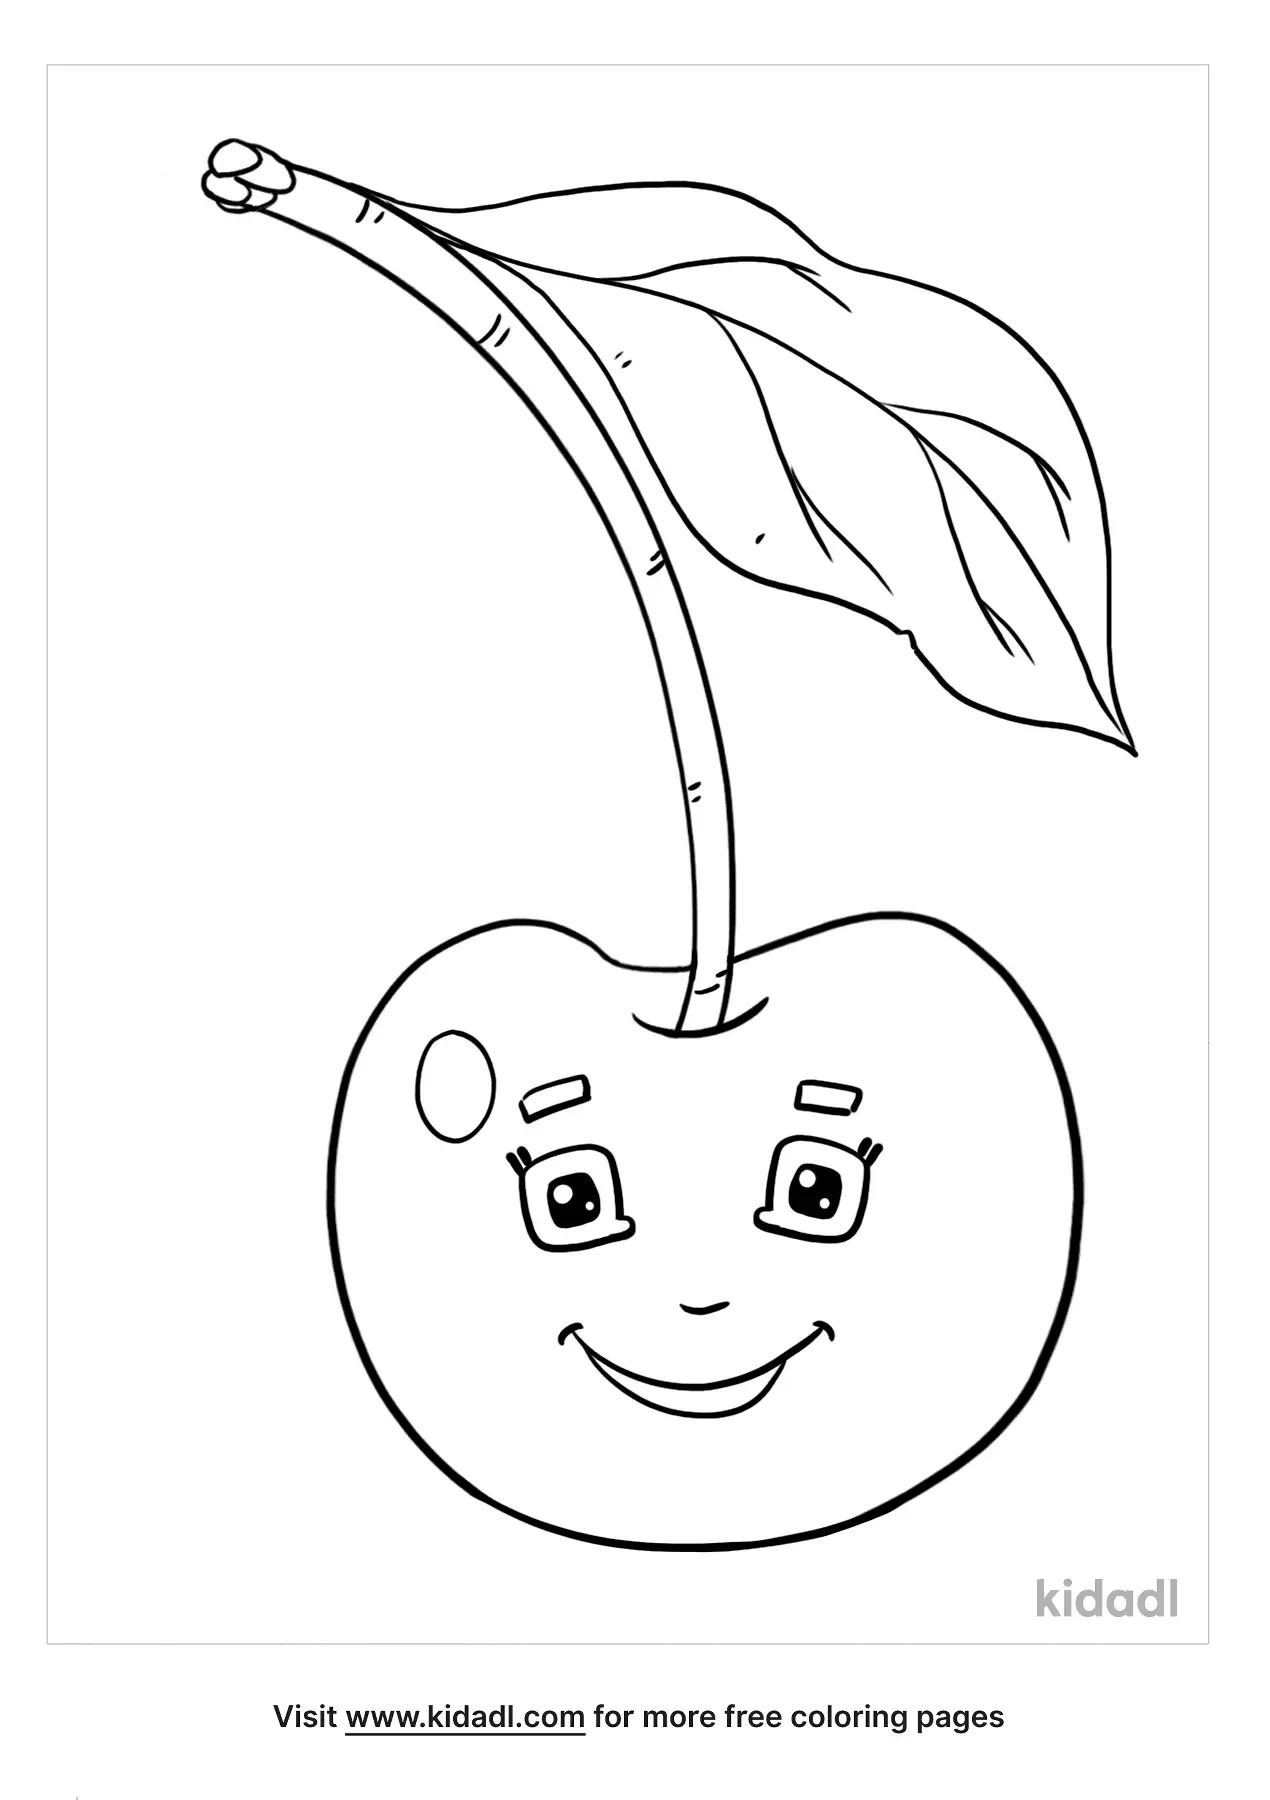 Free Cherry Coloring Page | Coloring Page Printables | Kidadl